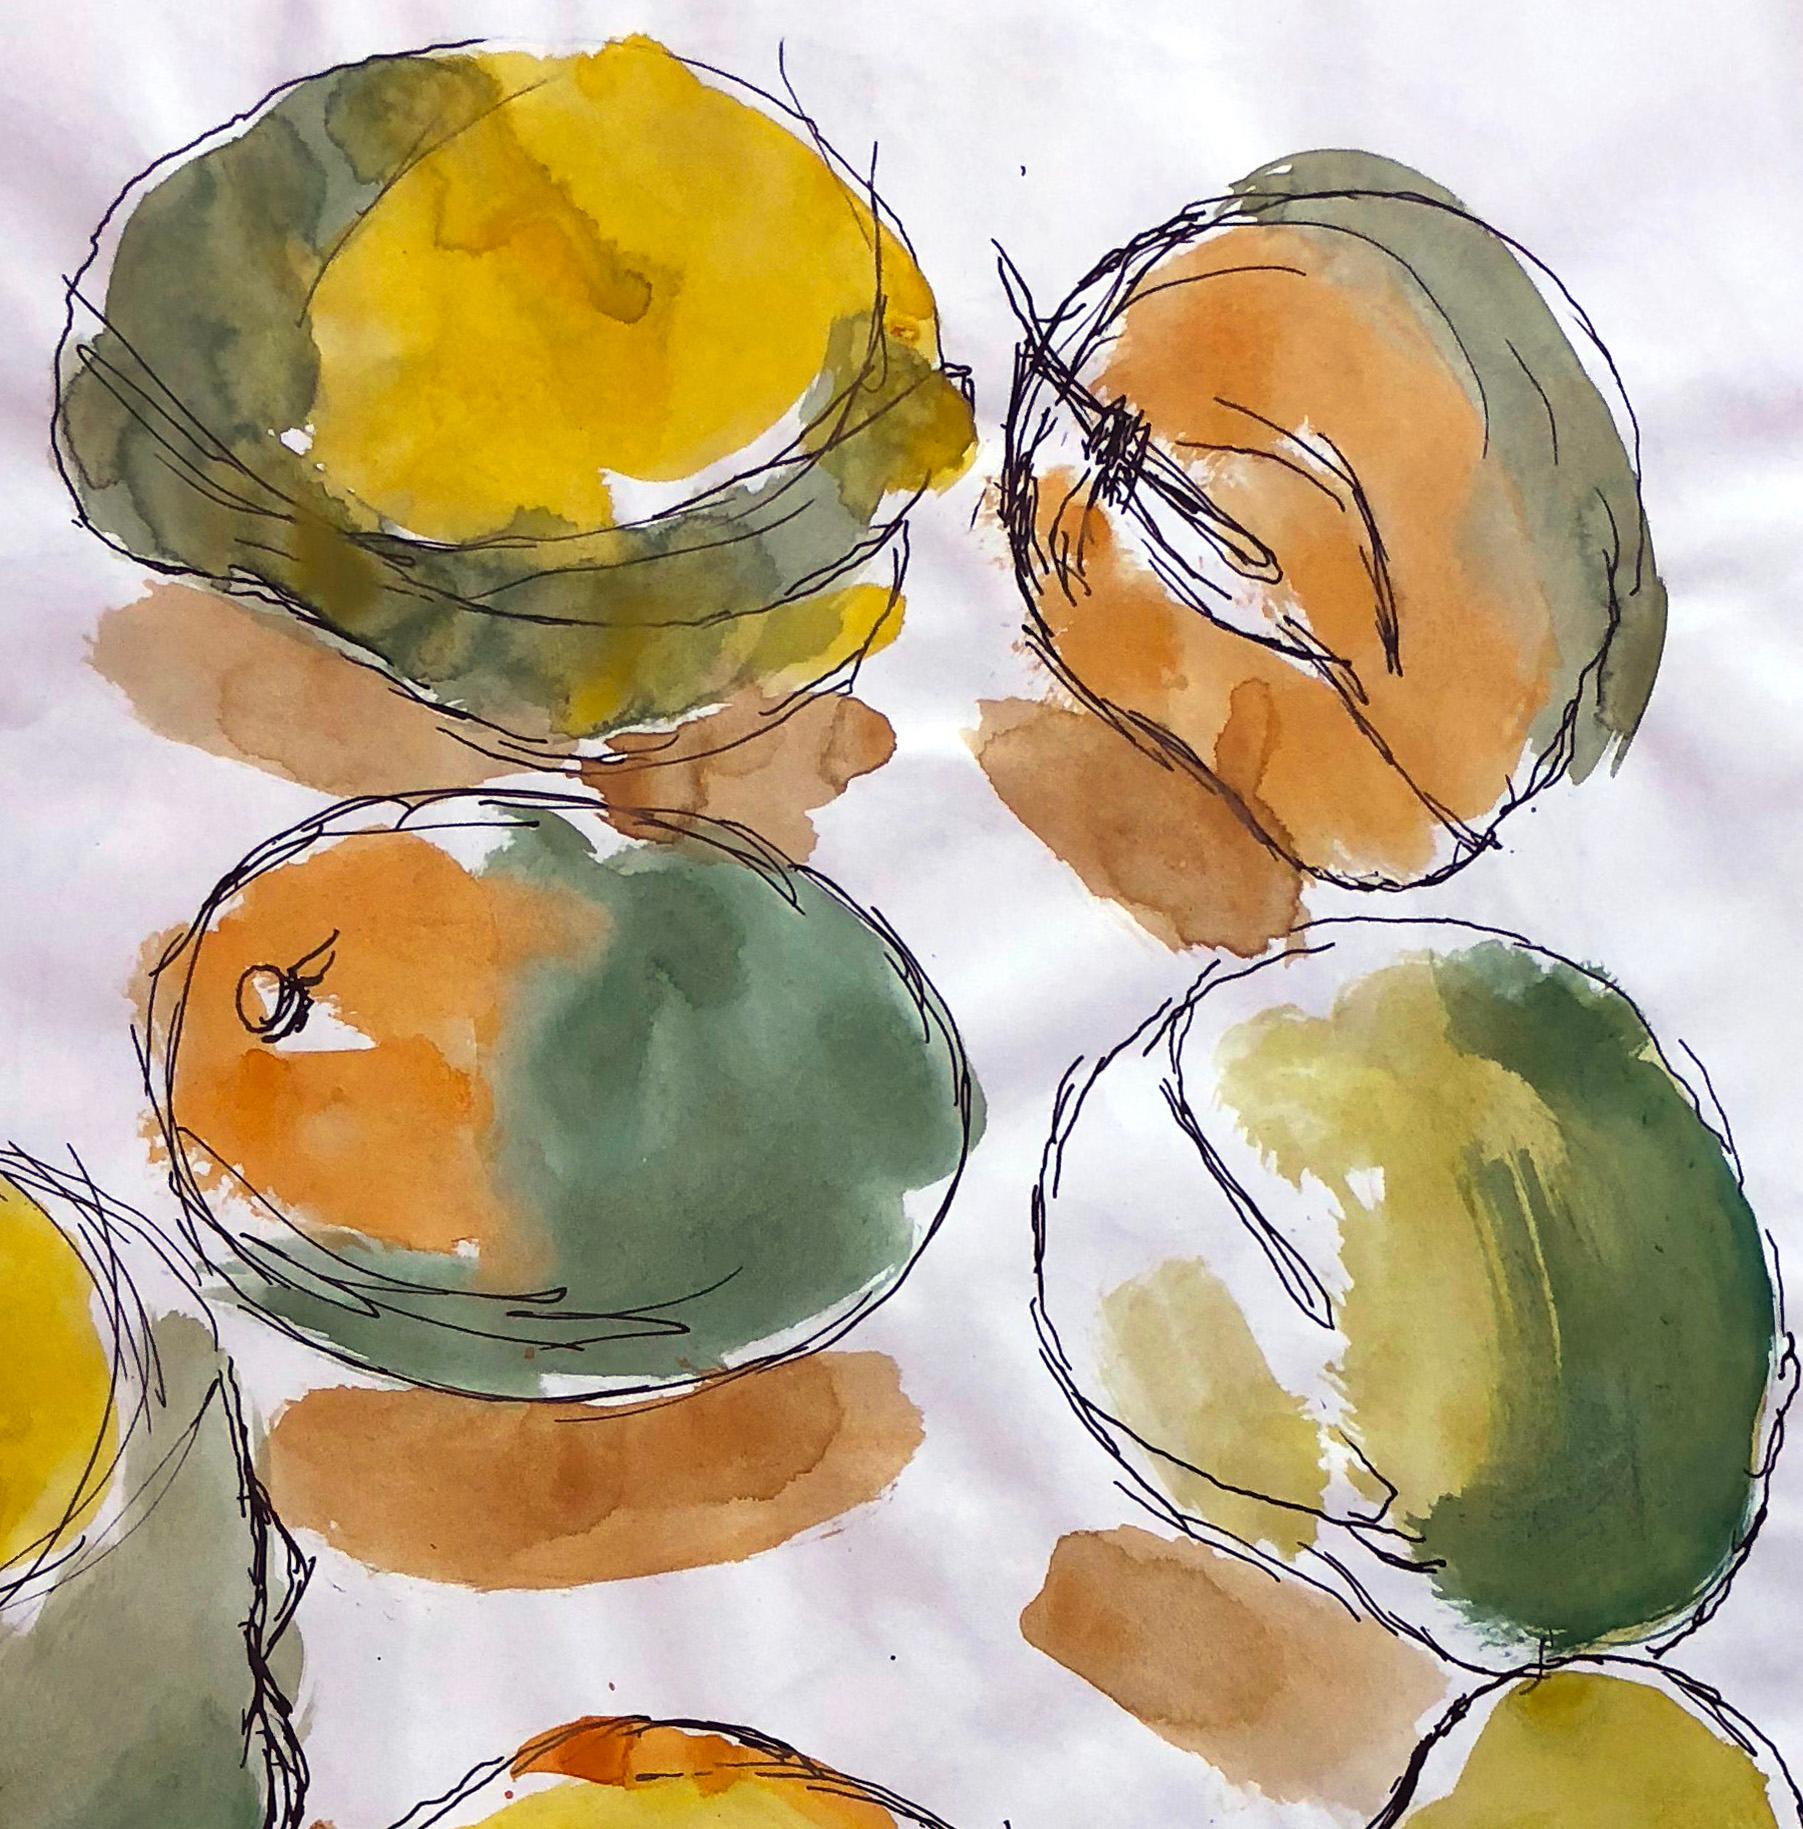 Mangos by Celso Castro
Watercolor and ink on archival paper
Individual size: 19.38 in H x 13.5 in W
One of a kind
2018.

Celso Castro-Daza was born in Valledupar, Colombia. He has a BFA from Pratt Institute, 1981and has exhibited extensively